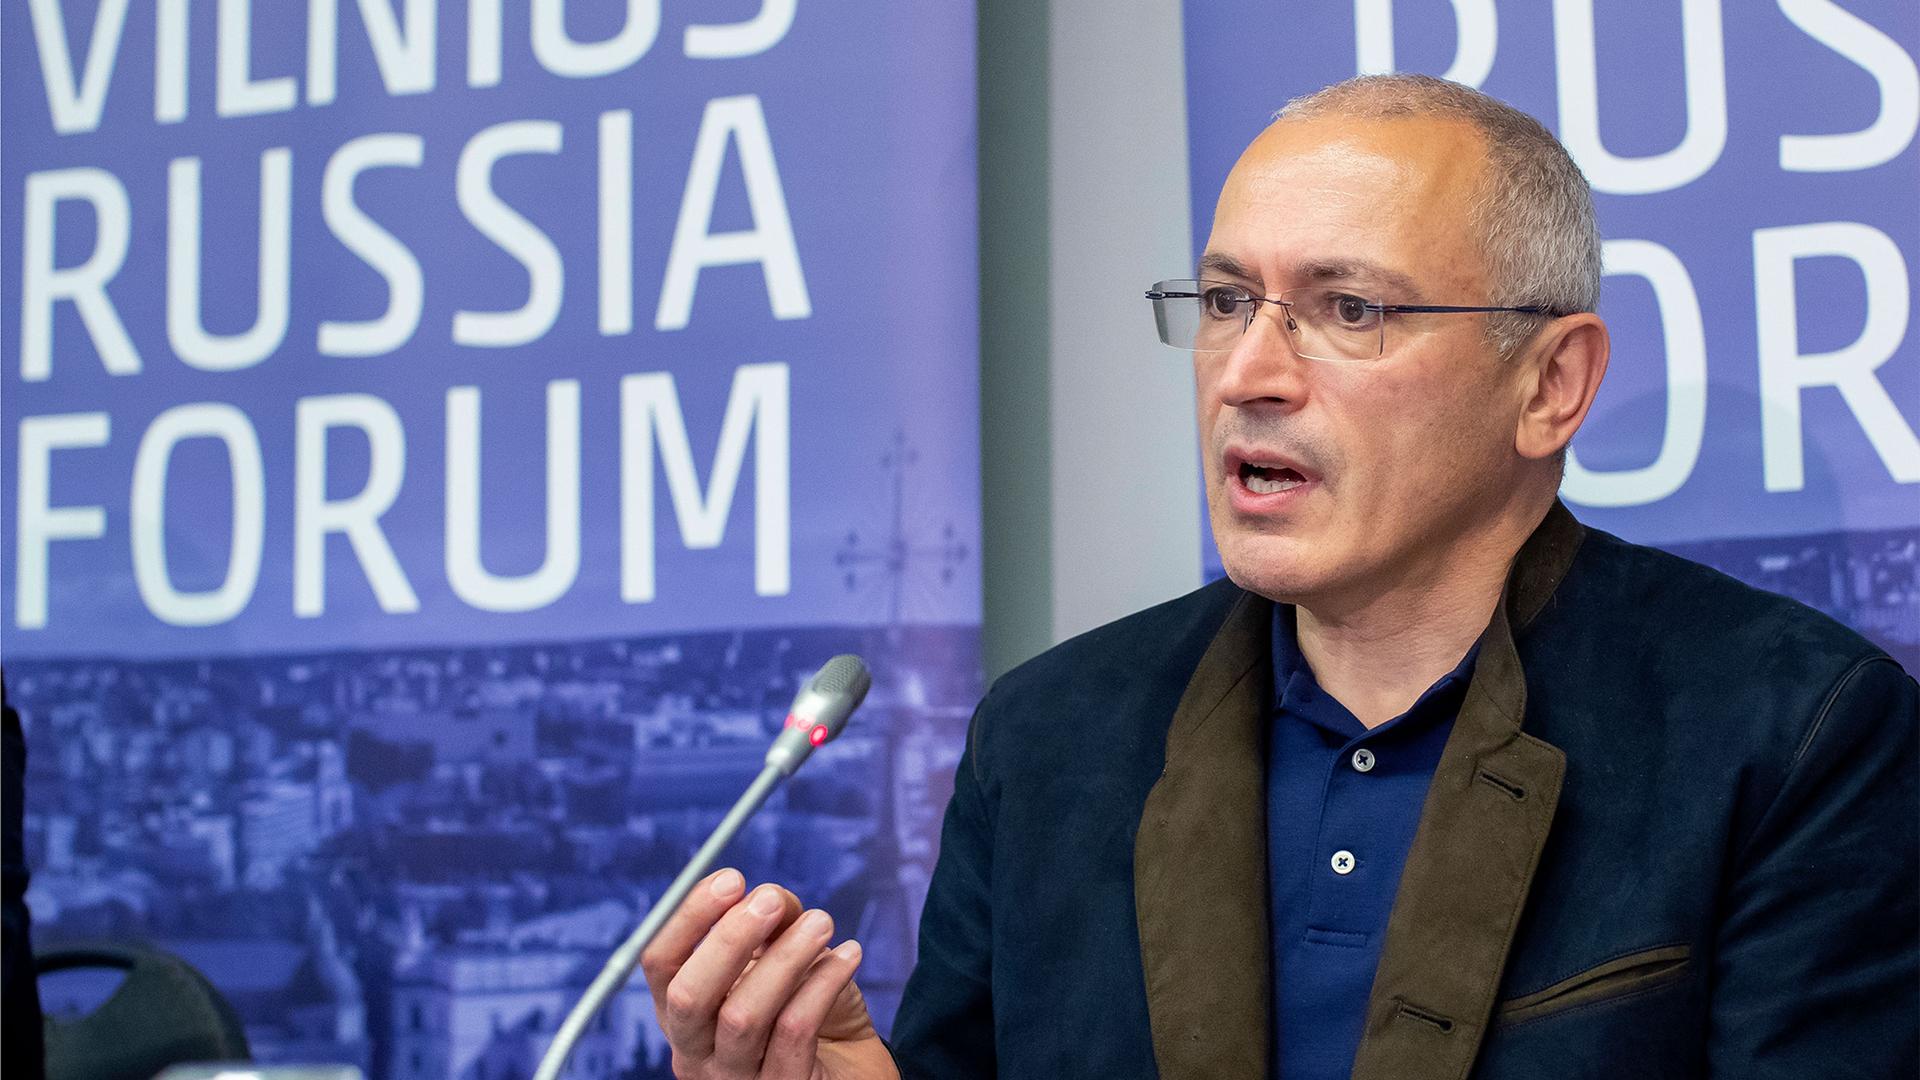 Russian opposition figure and former owner of the Yukos Oil Company Mikhail Khodorkovsky speaks during a press conference with Lithuania's Minister of Foreign Affairs at the "Esperanza" hotel in Paunguriai village